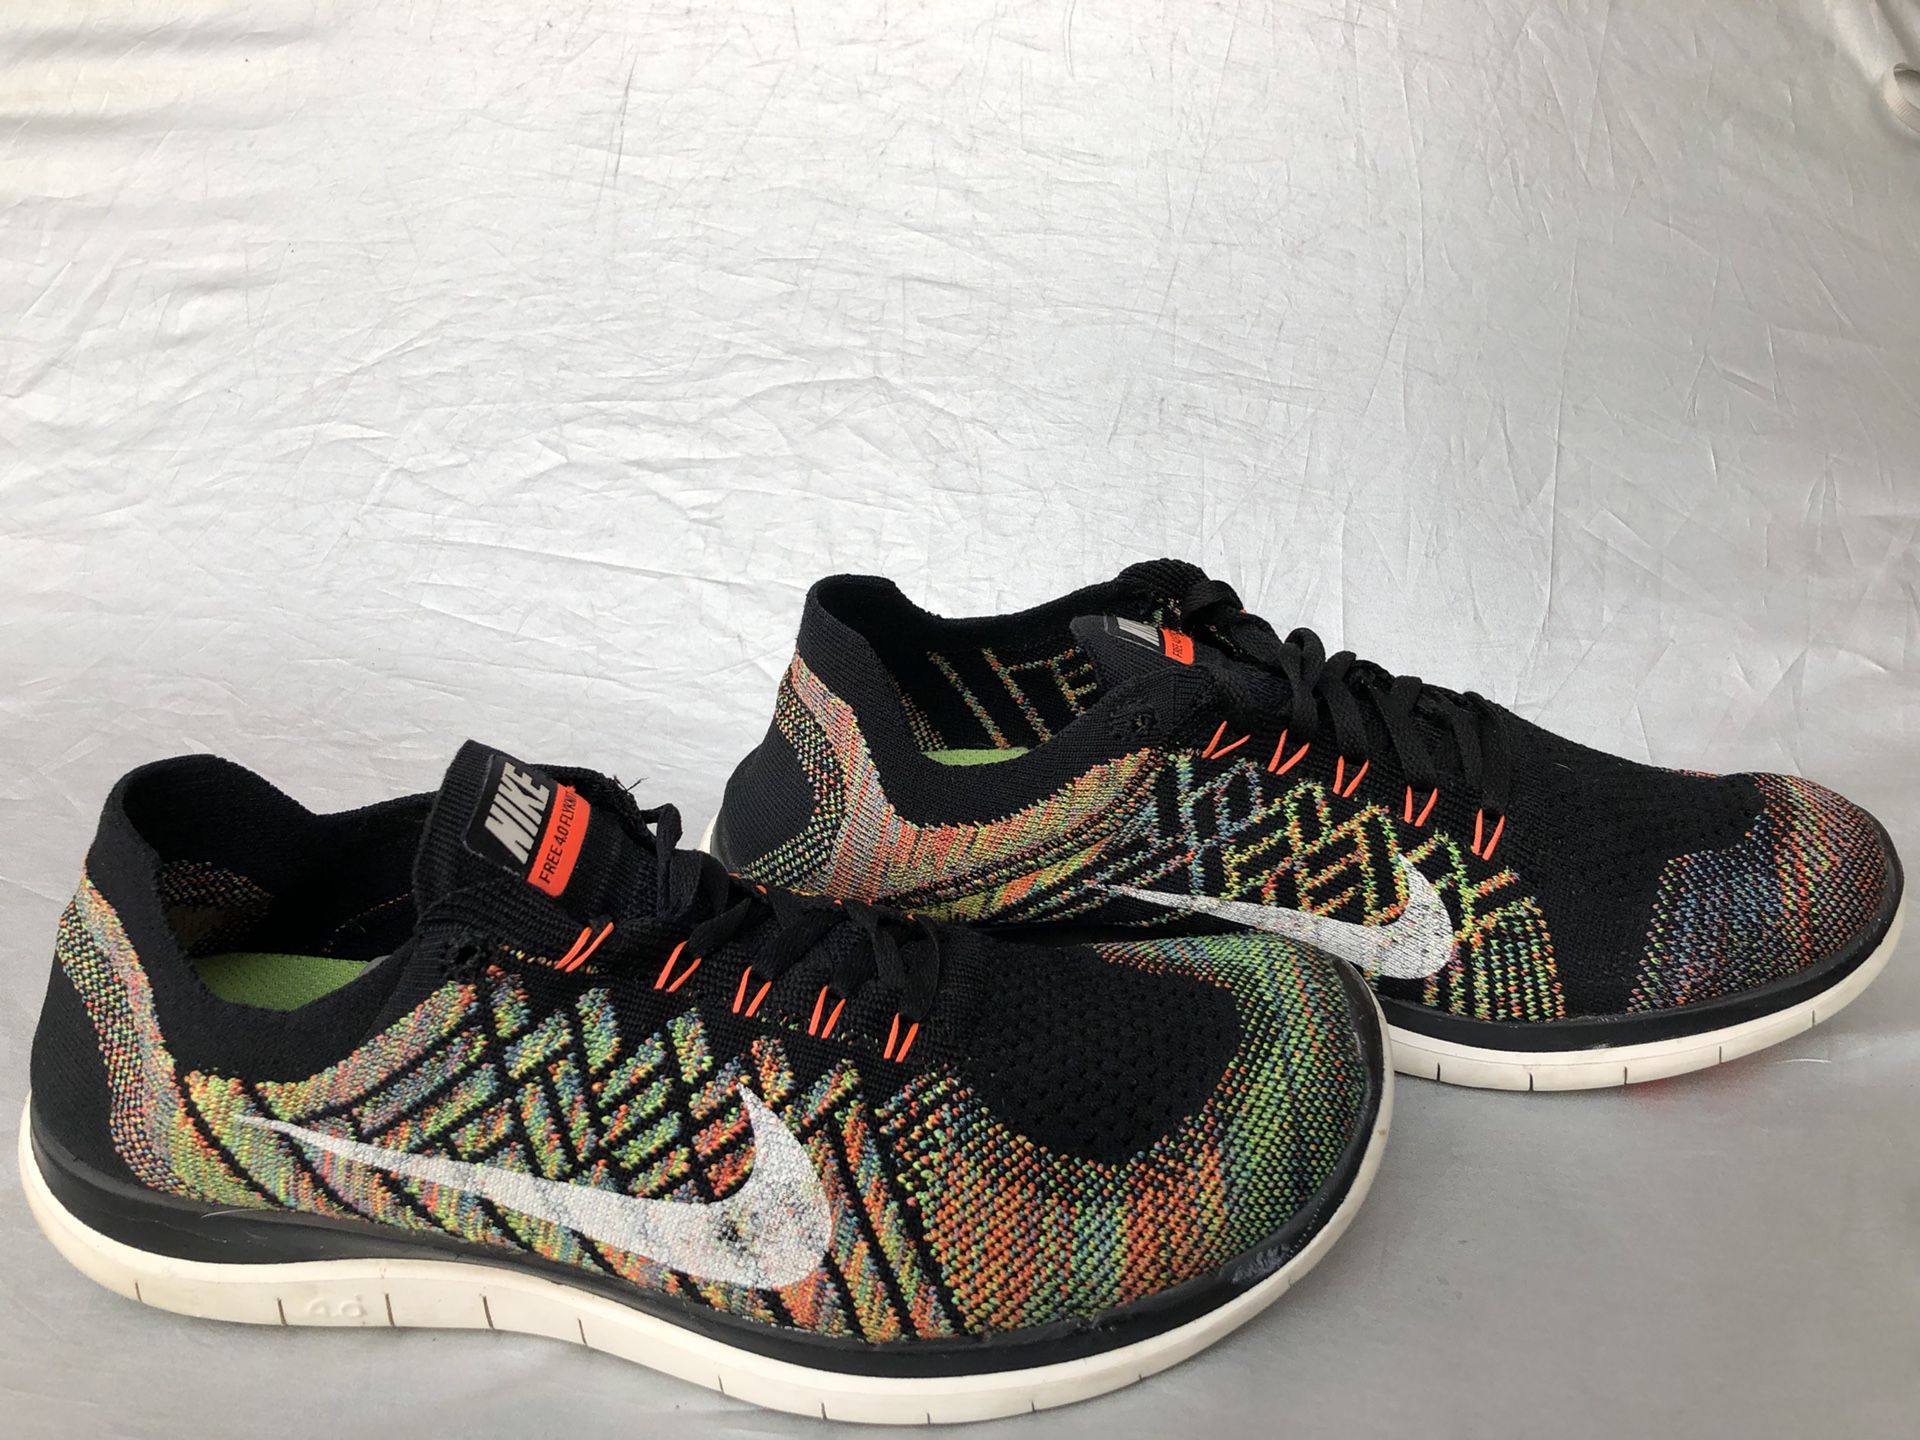 Nike Free 4.0 FlyKnit MultiColor 717075-011 Box for Sale in Vancouver, WA - OfferUp